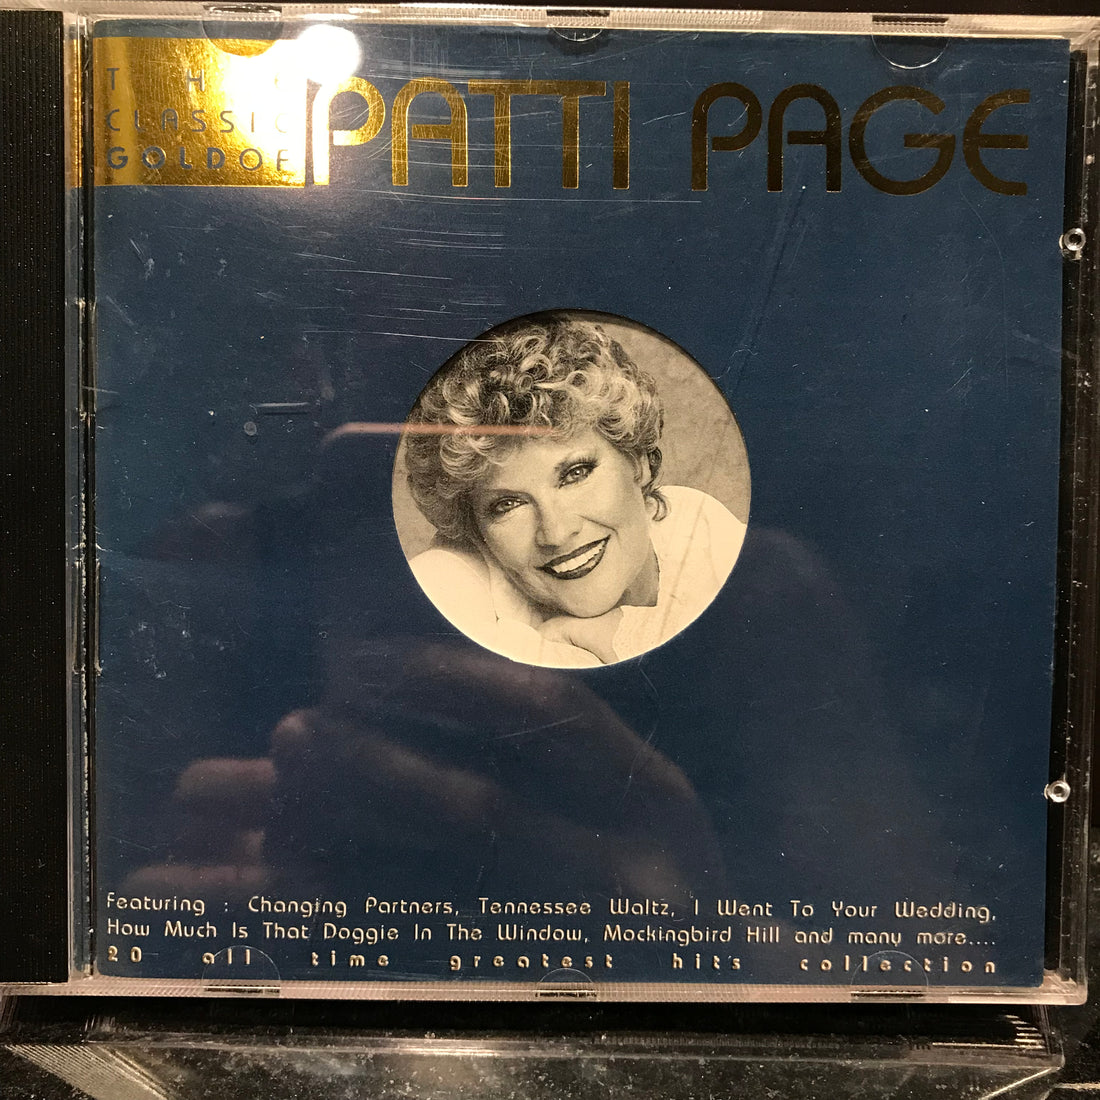 Patti Page - The Classic Gold Of Patti Page (CD) (NM) (Alloy Gold)